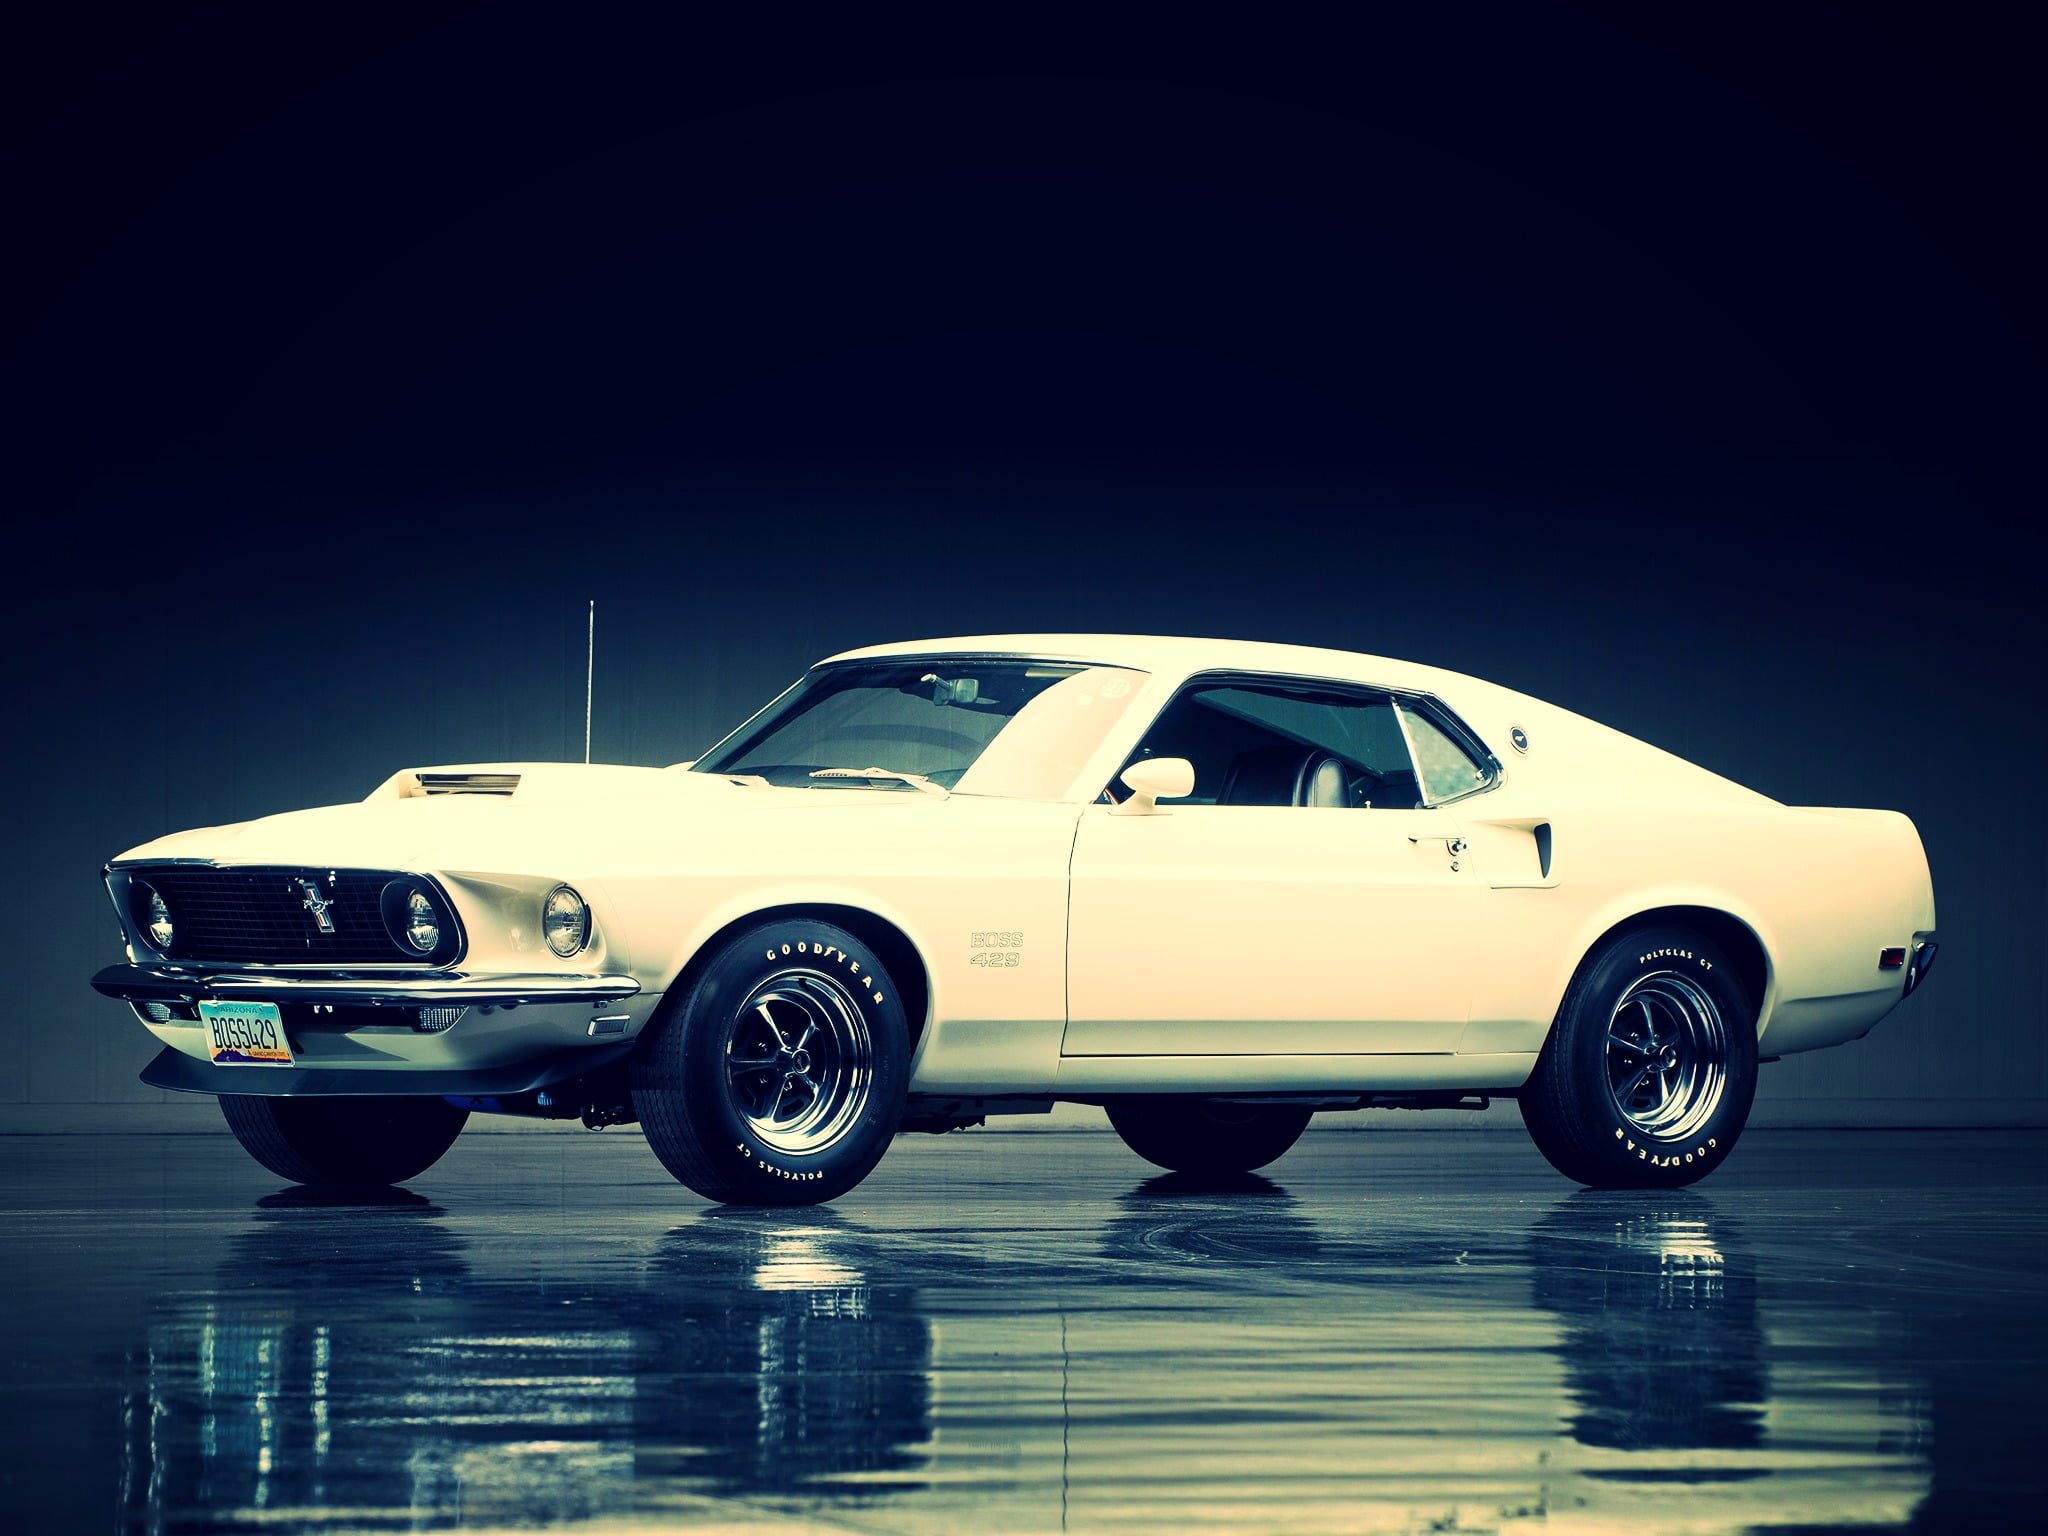 white coupe, Ford Mustang, car, mode of transportation, land vehicle